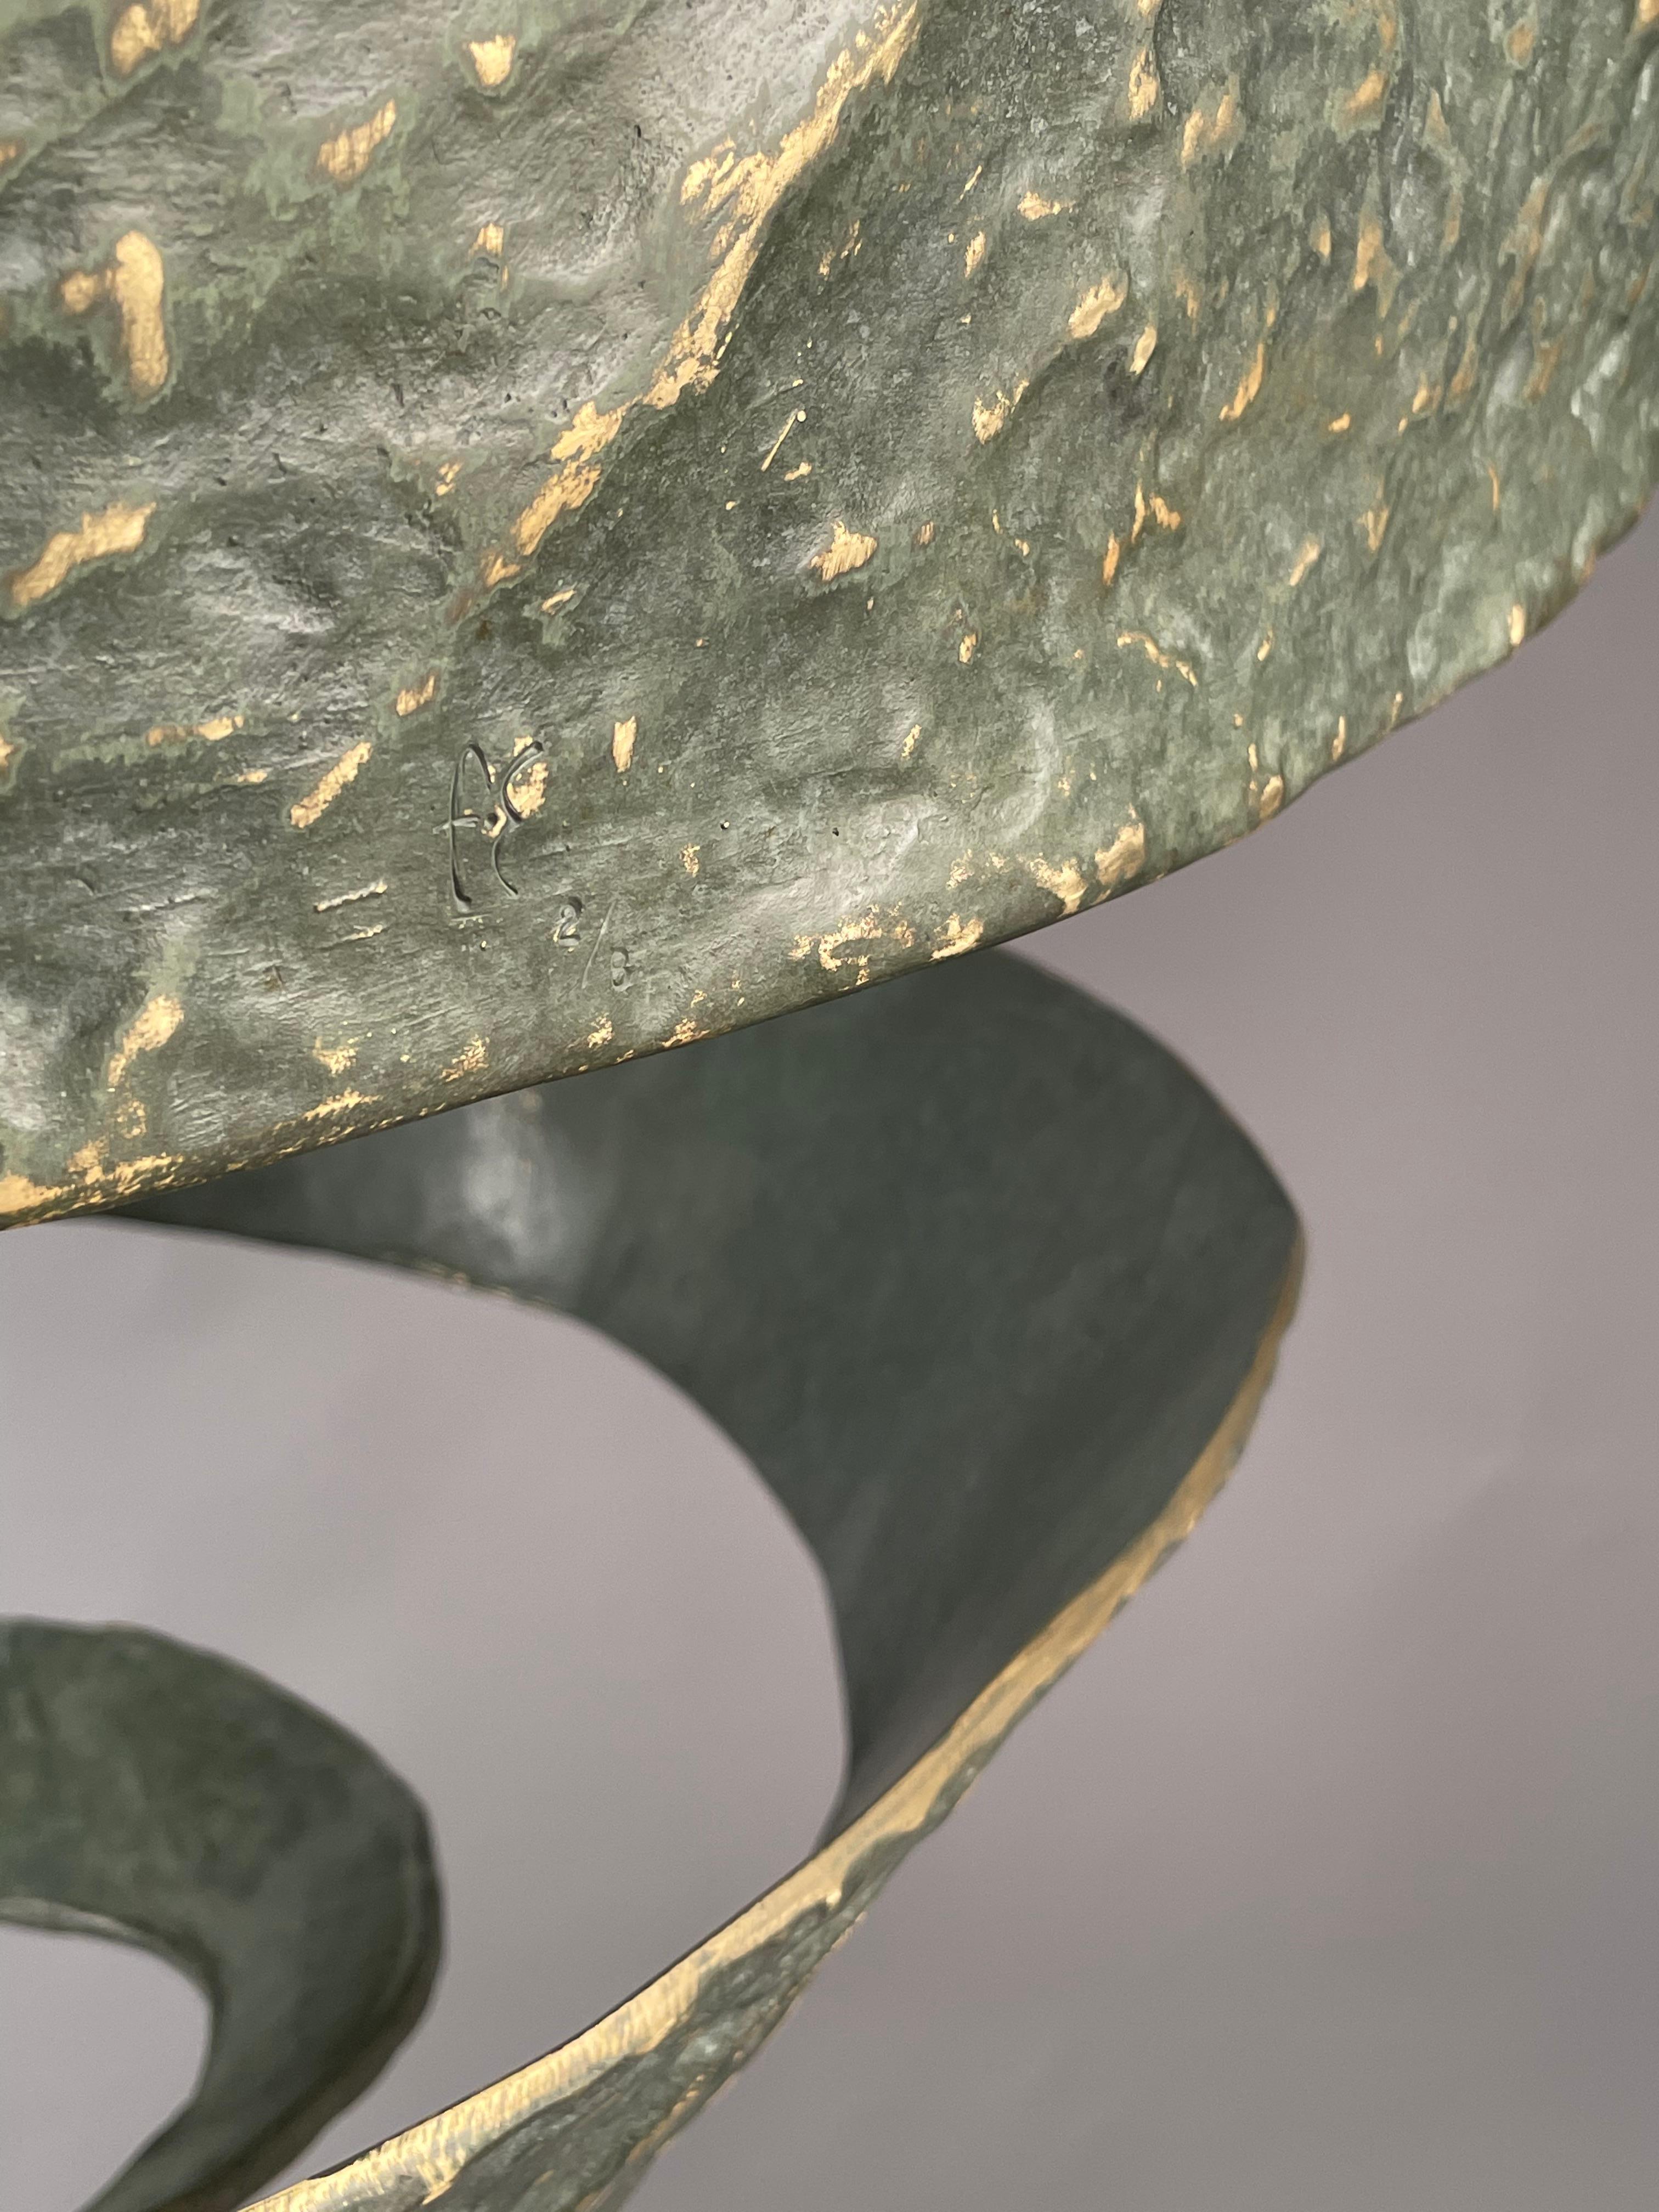 Green patinated bronze “swirl” fixture, inspired by an orange peel. The fixture will be suspended from a ceiling-mounted brass frame, which can be painted to match the ceiling. Three sockets sit inside the bottom. Weight approx. 250 lbs
Custom